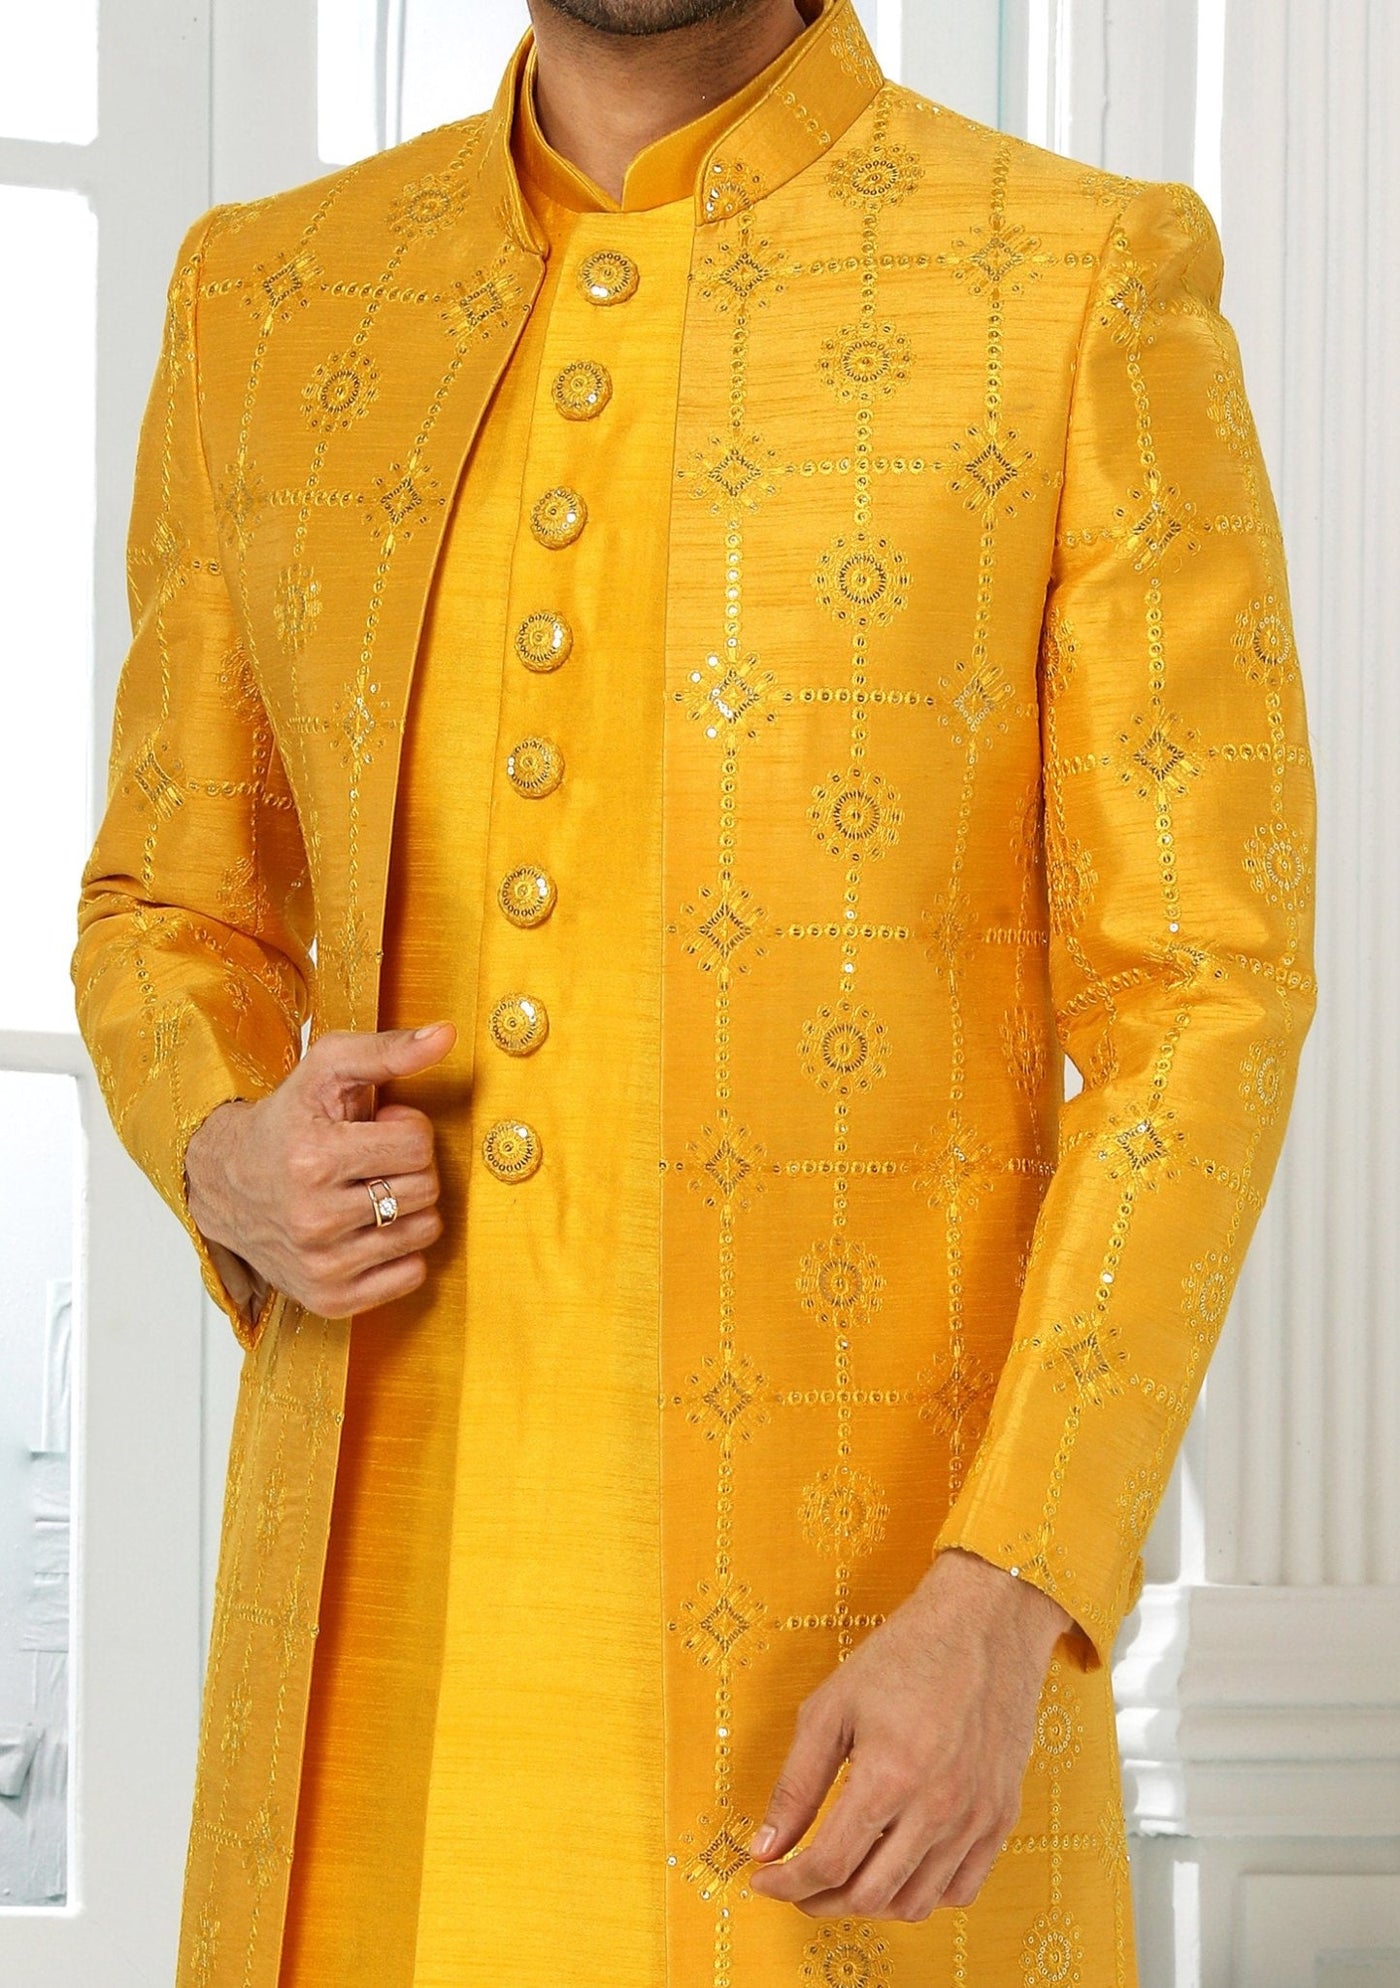 Men's Indo Western Party Wear Sherwani Suit With Jacket - db20439